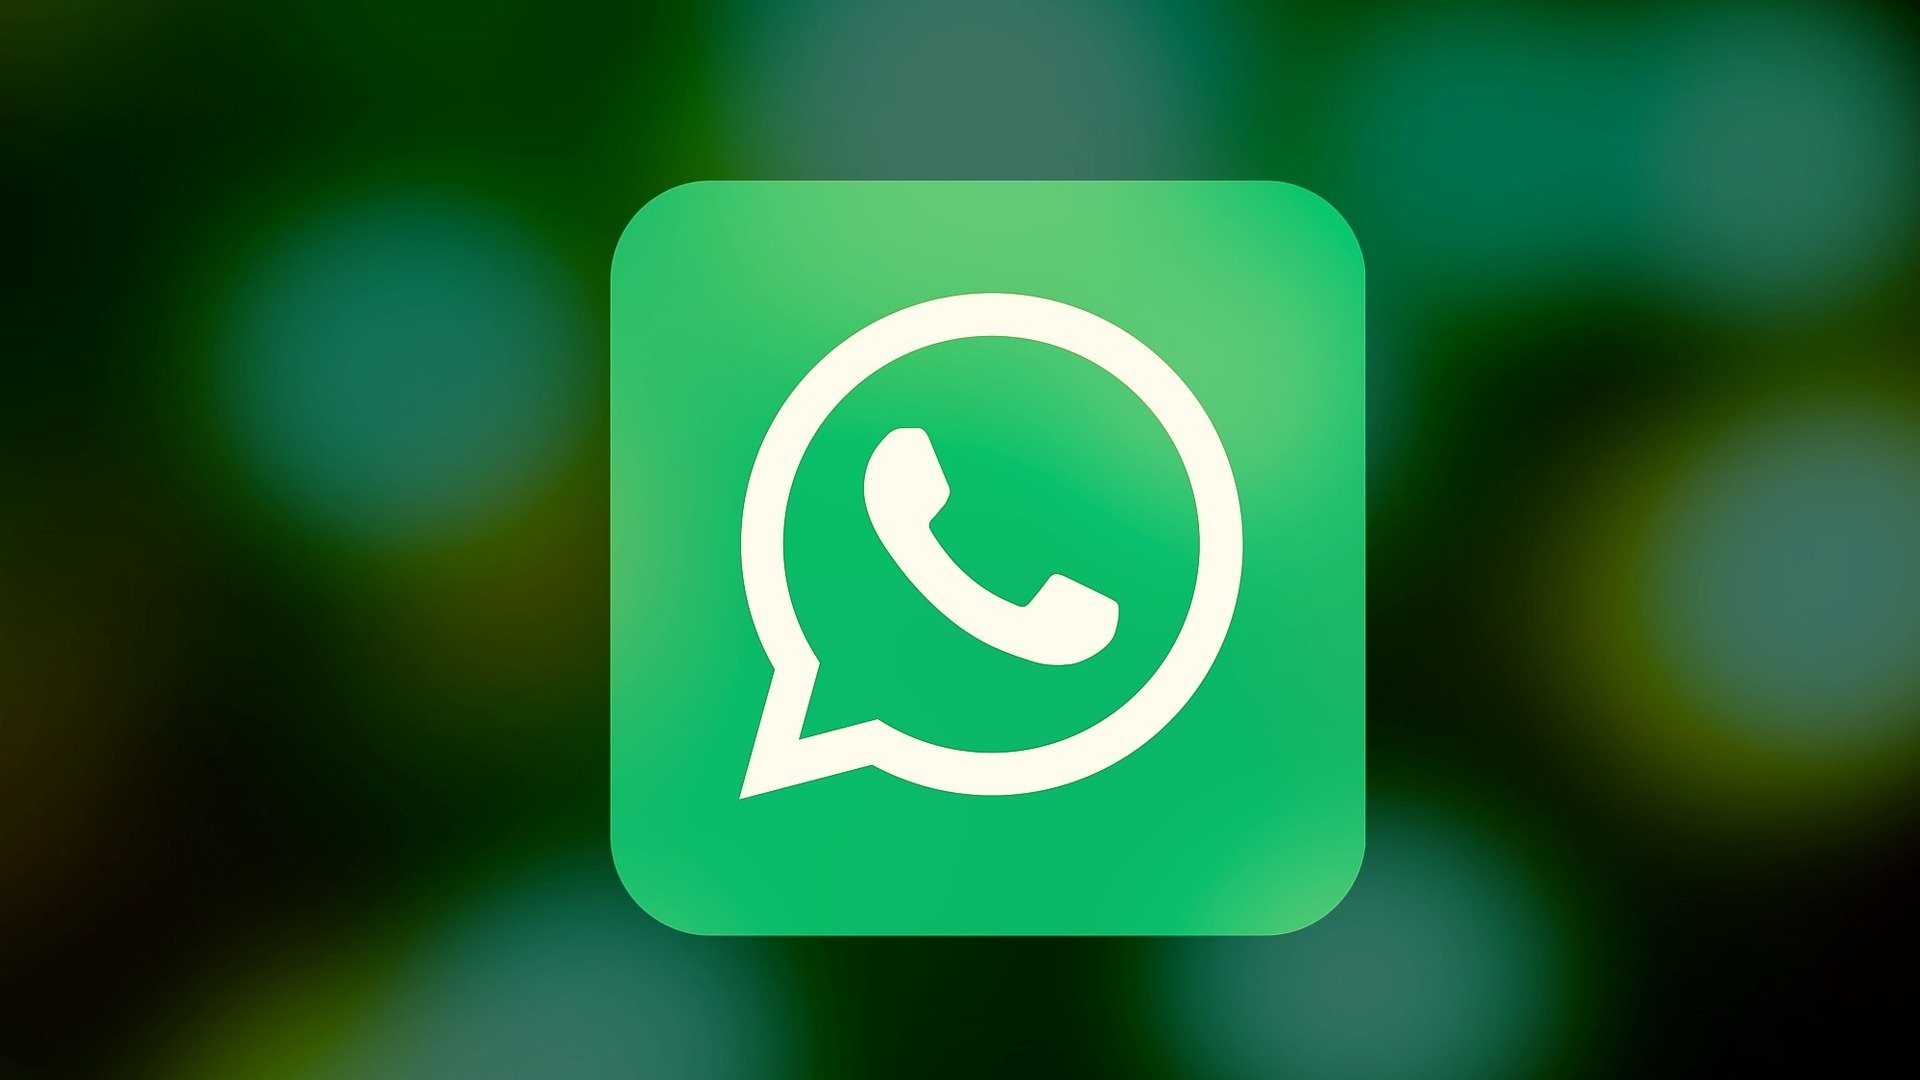 WhatsApp Testing Allowing Users to Send HD Videos